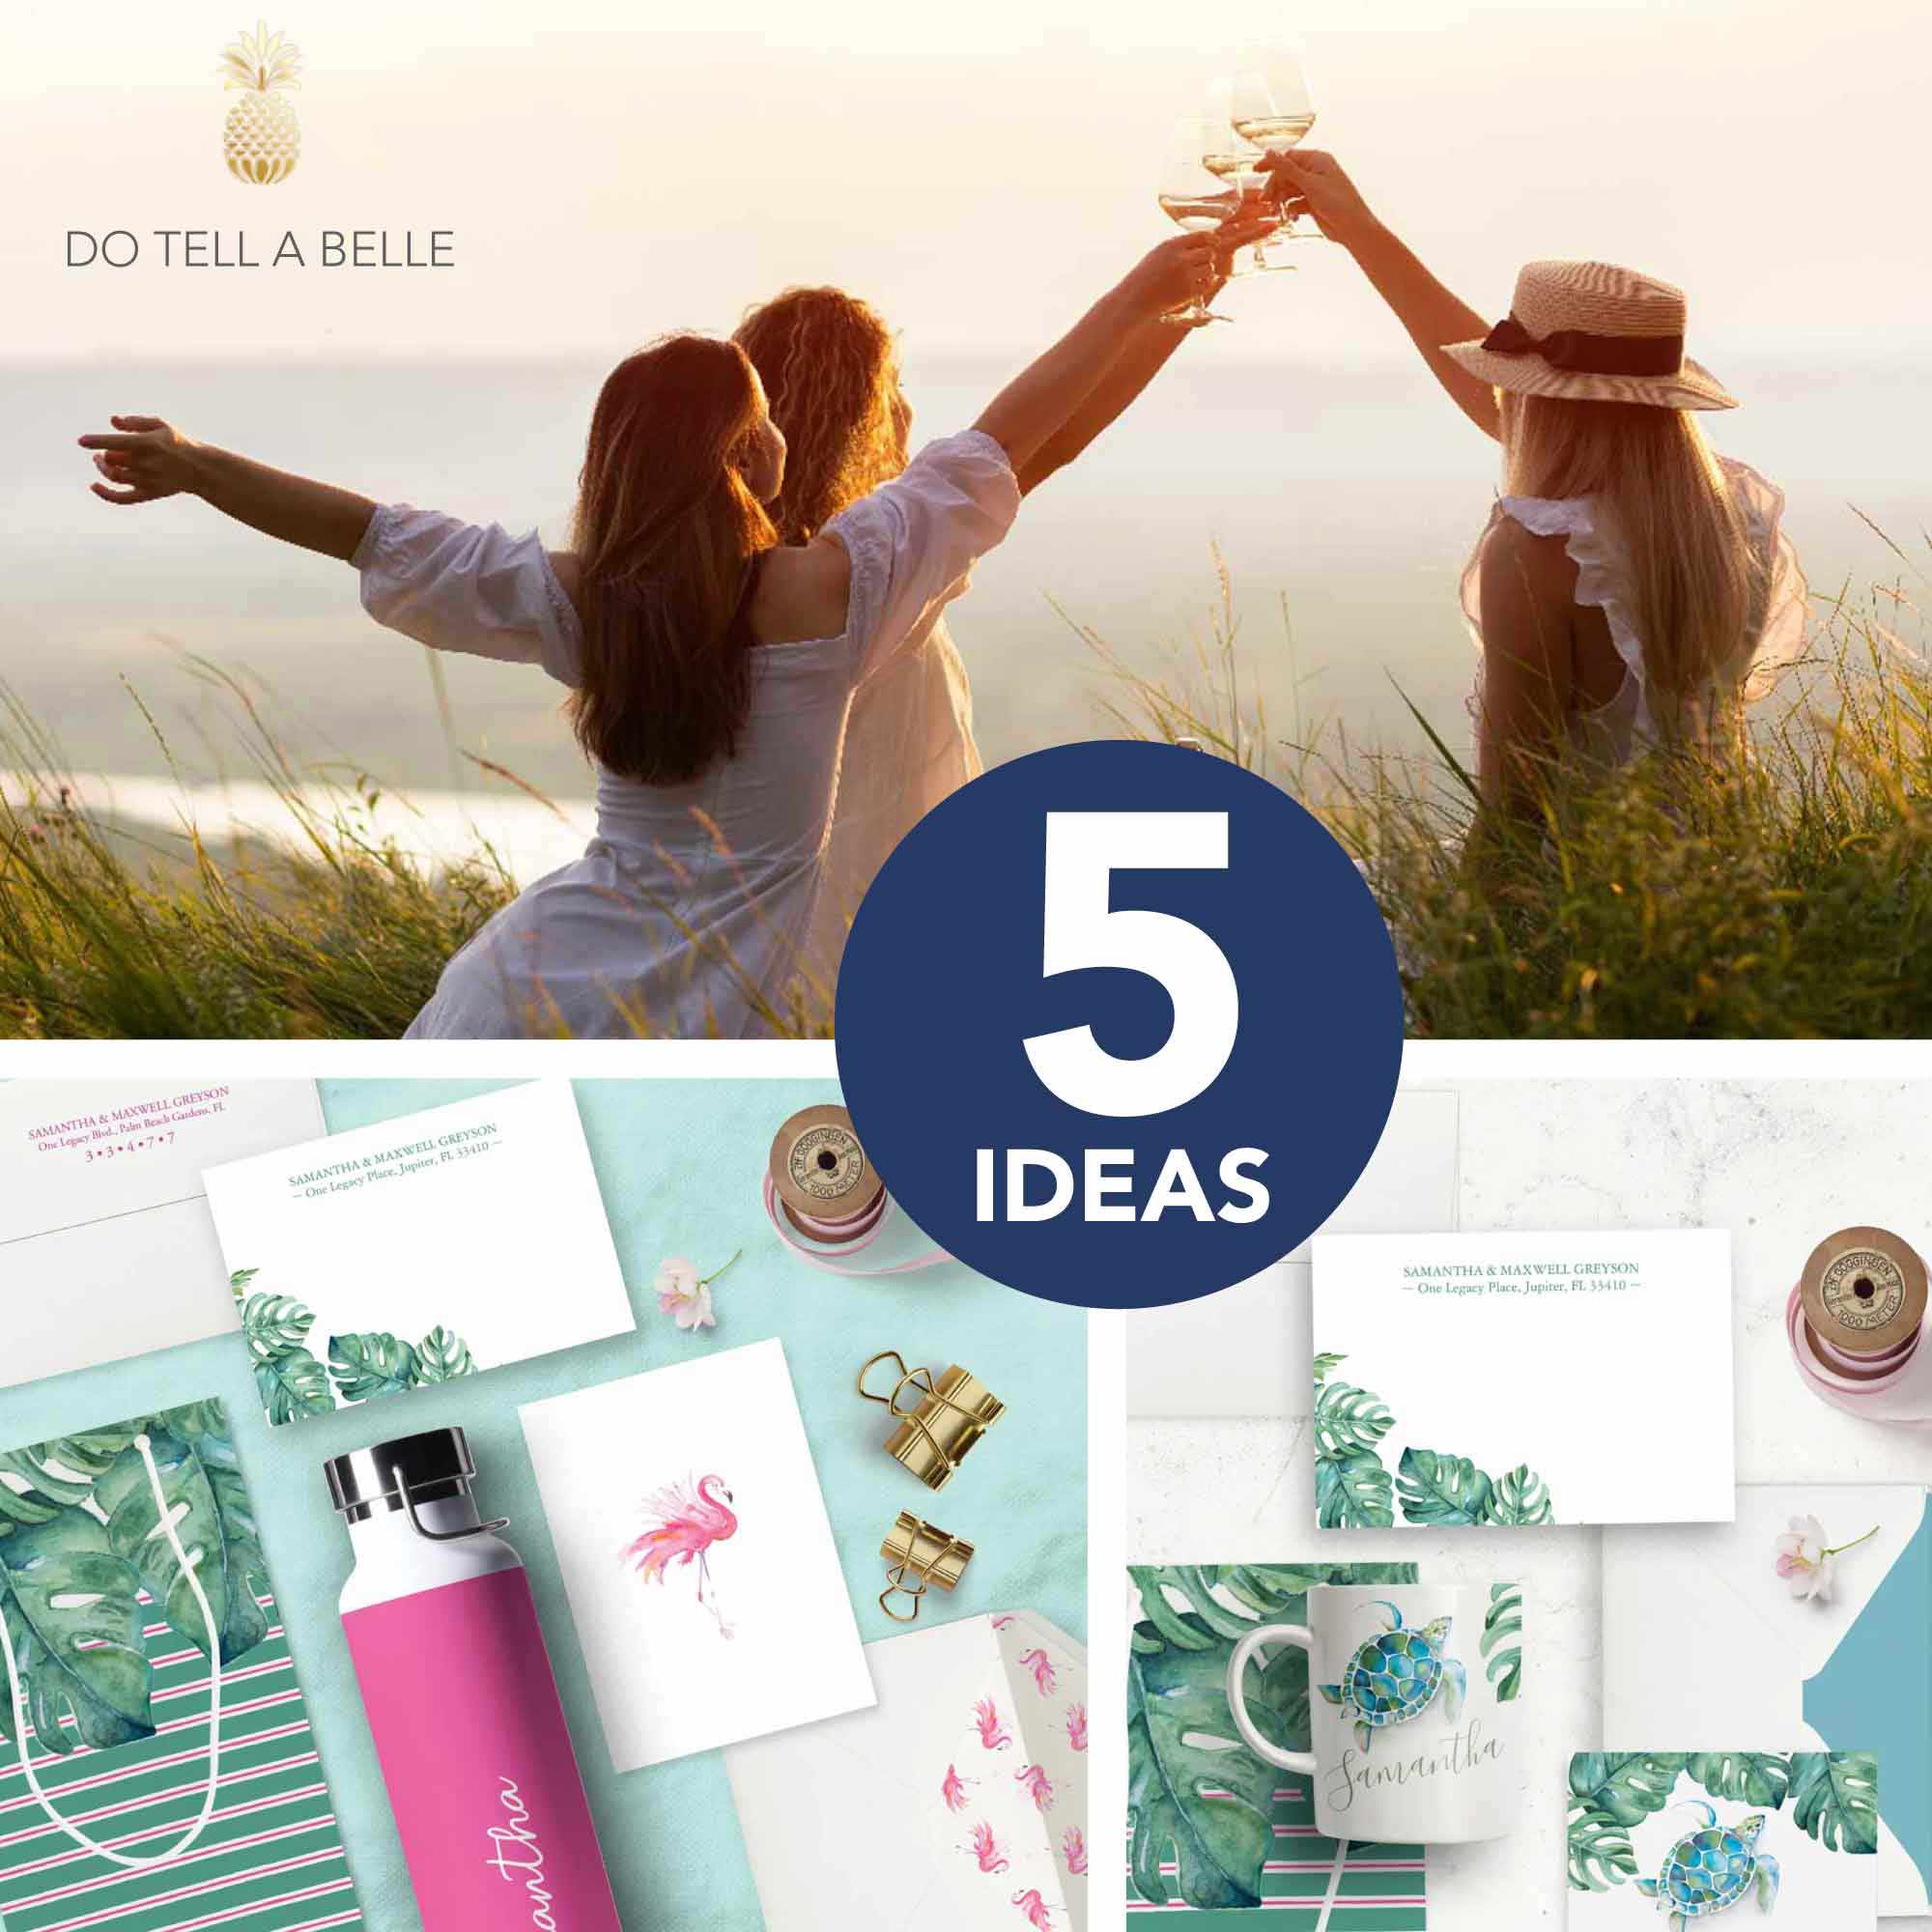 Creative bridesmaid proposal ideas features for destination beach weddings by Victoria Grigaliunas of Do Tell A Belle